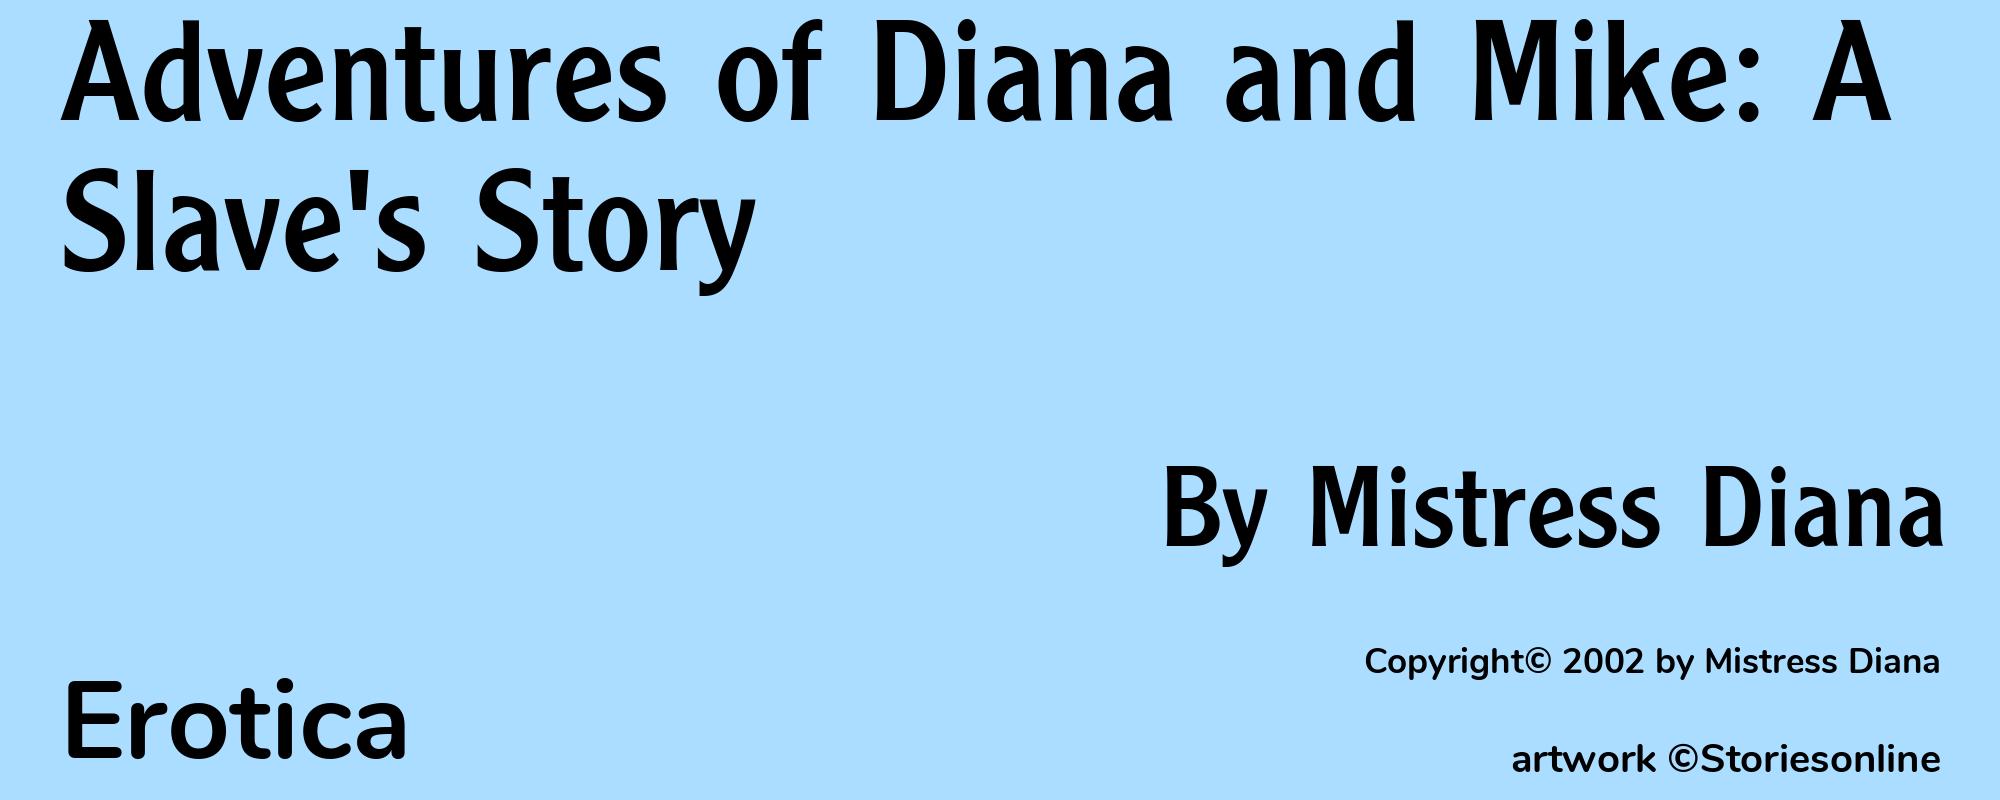 Adventures of Diana and Mike: A Slave's Story - Cover